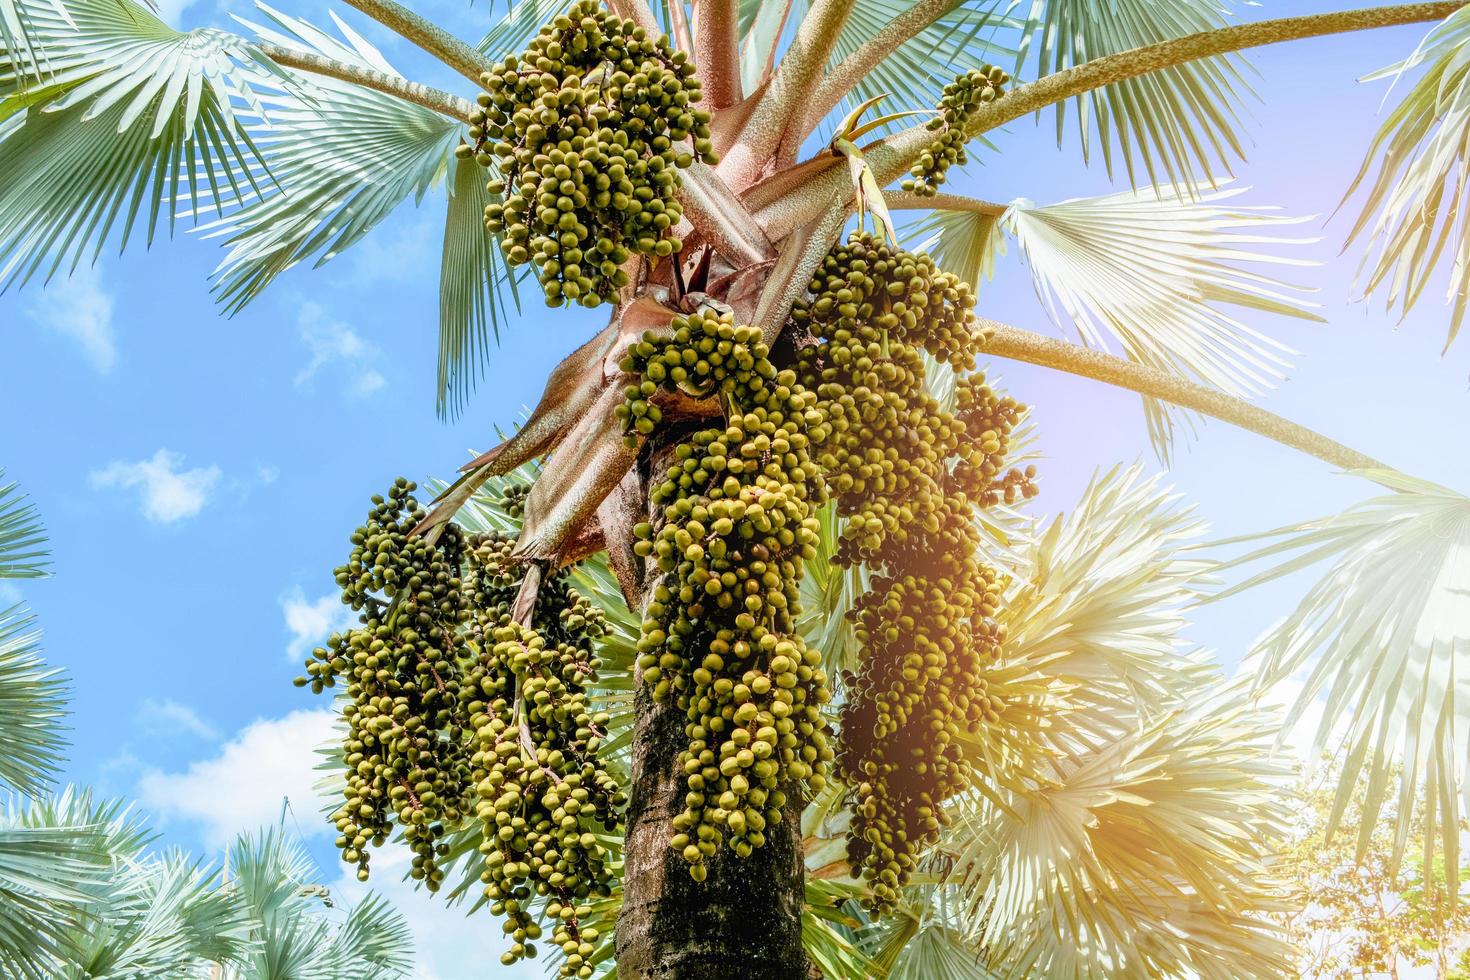 palm fruit on tree in the garden on bright day and blue sky background photo